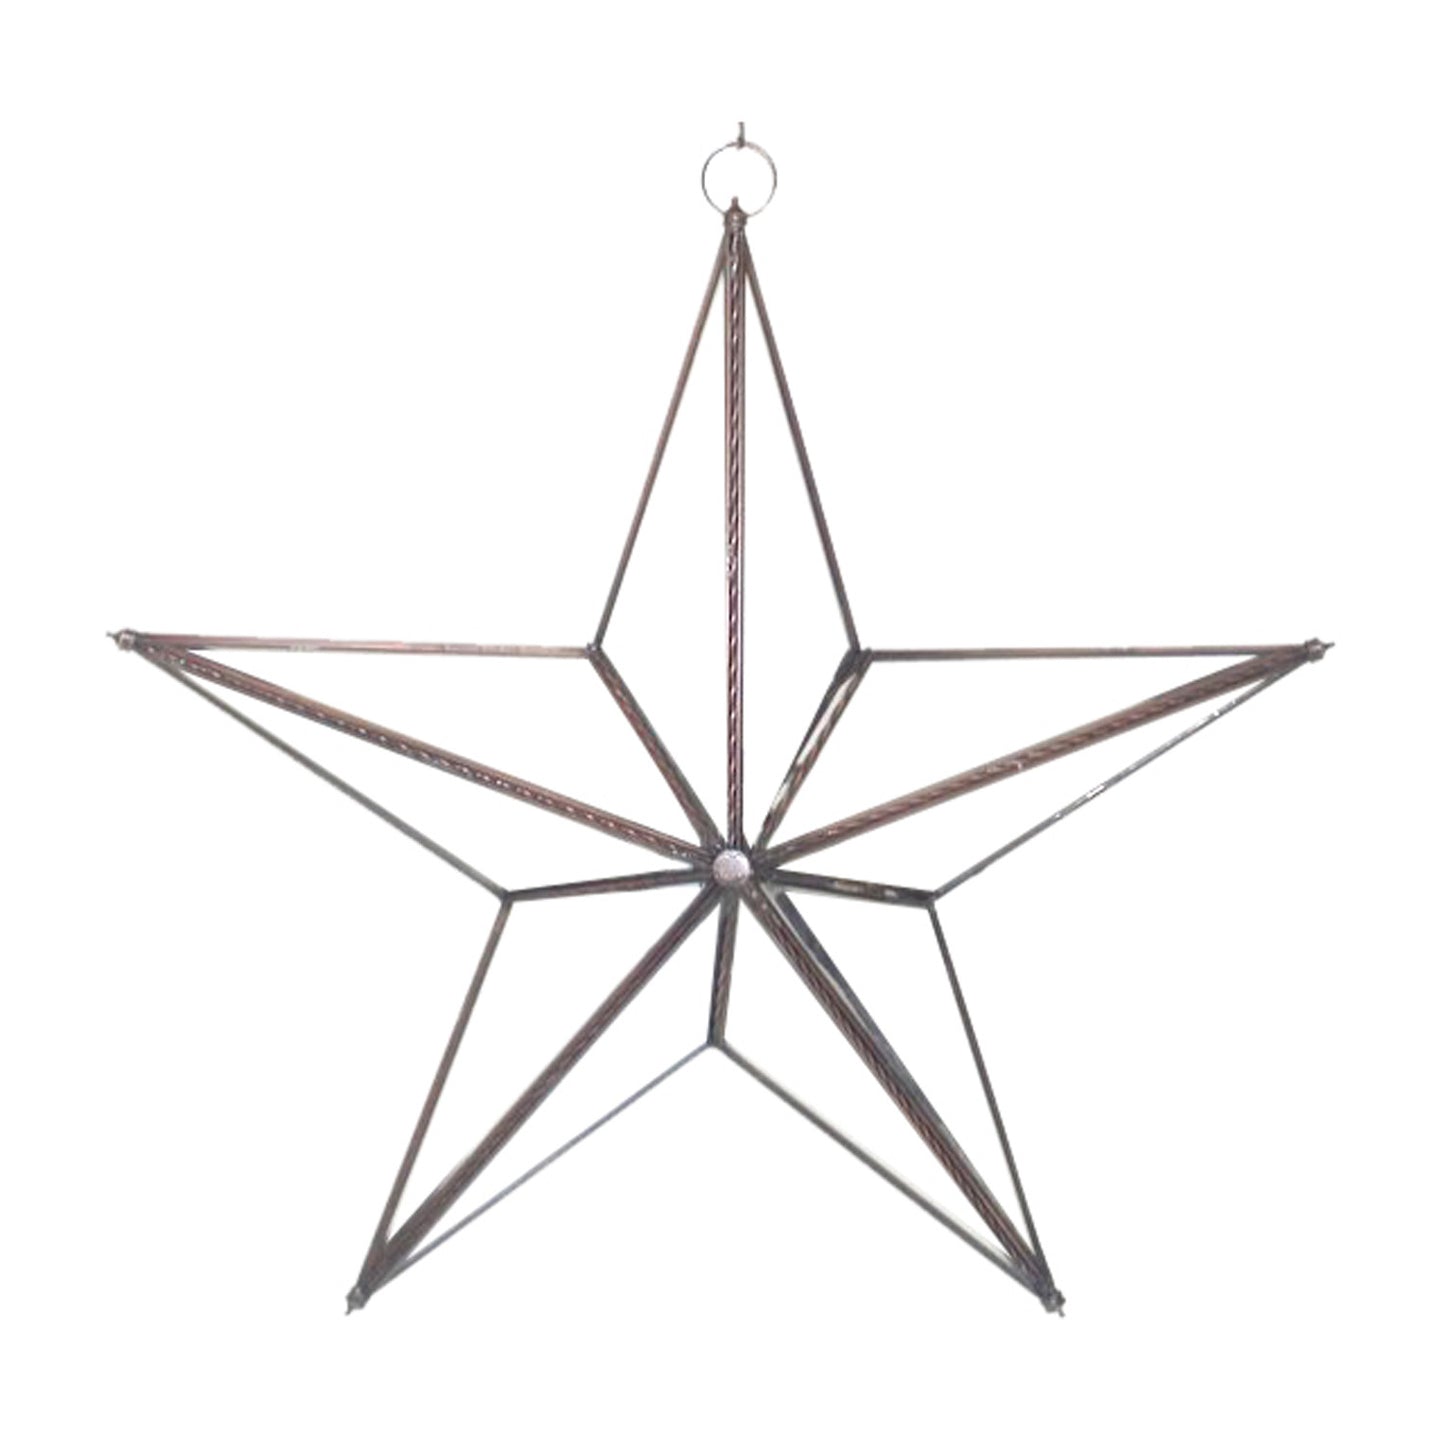 GiftBay 339 Huge Clear Hanging Glass Star 15" High for Indoor and Outdoor Festive Christmas Decoration.